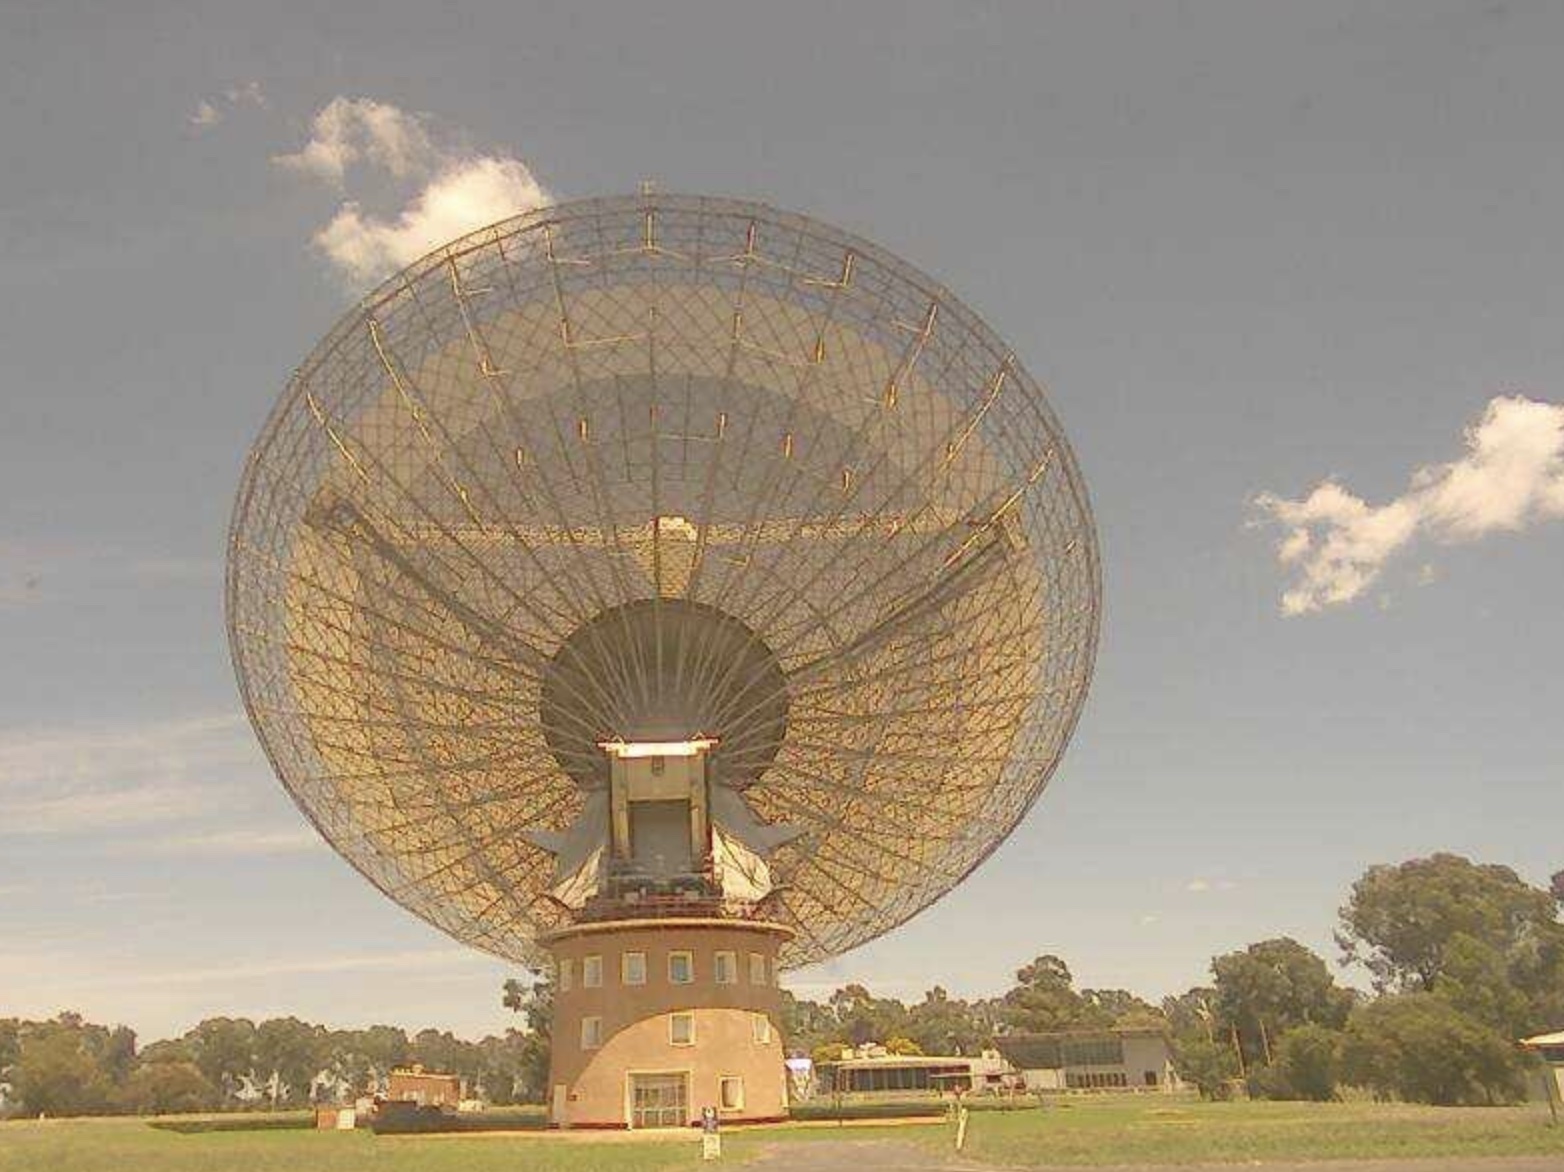 Murriyang, the Parkes 64m telescope, pictured during a Long Baseline Array observing session